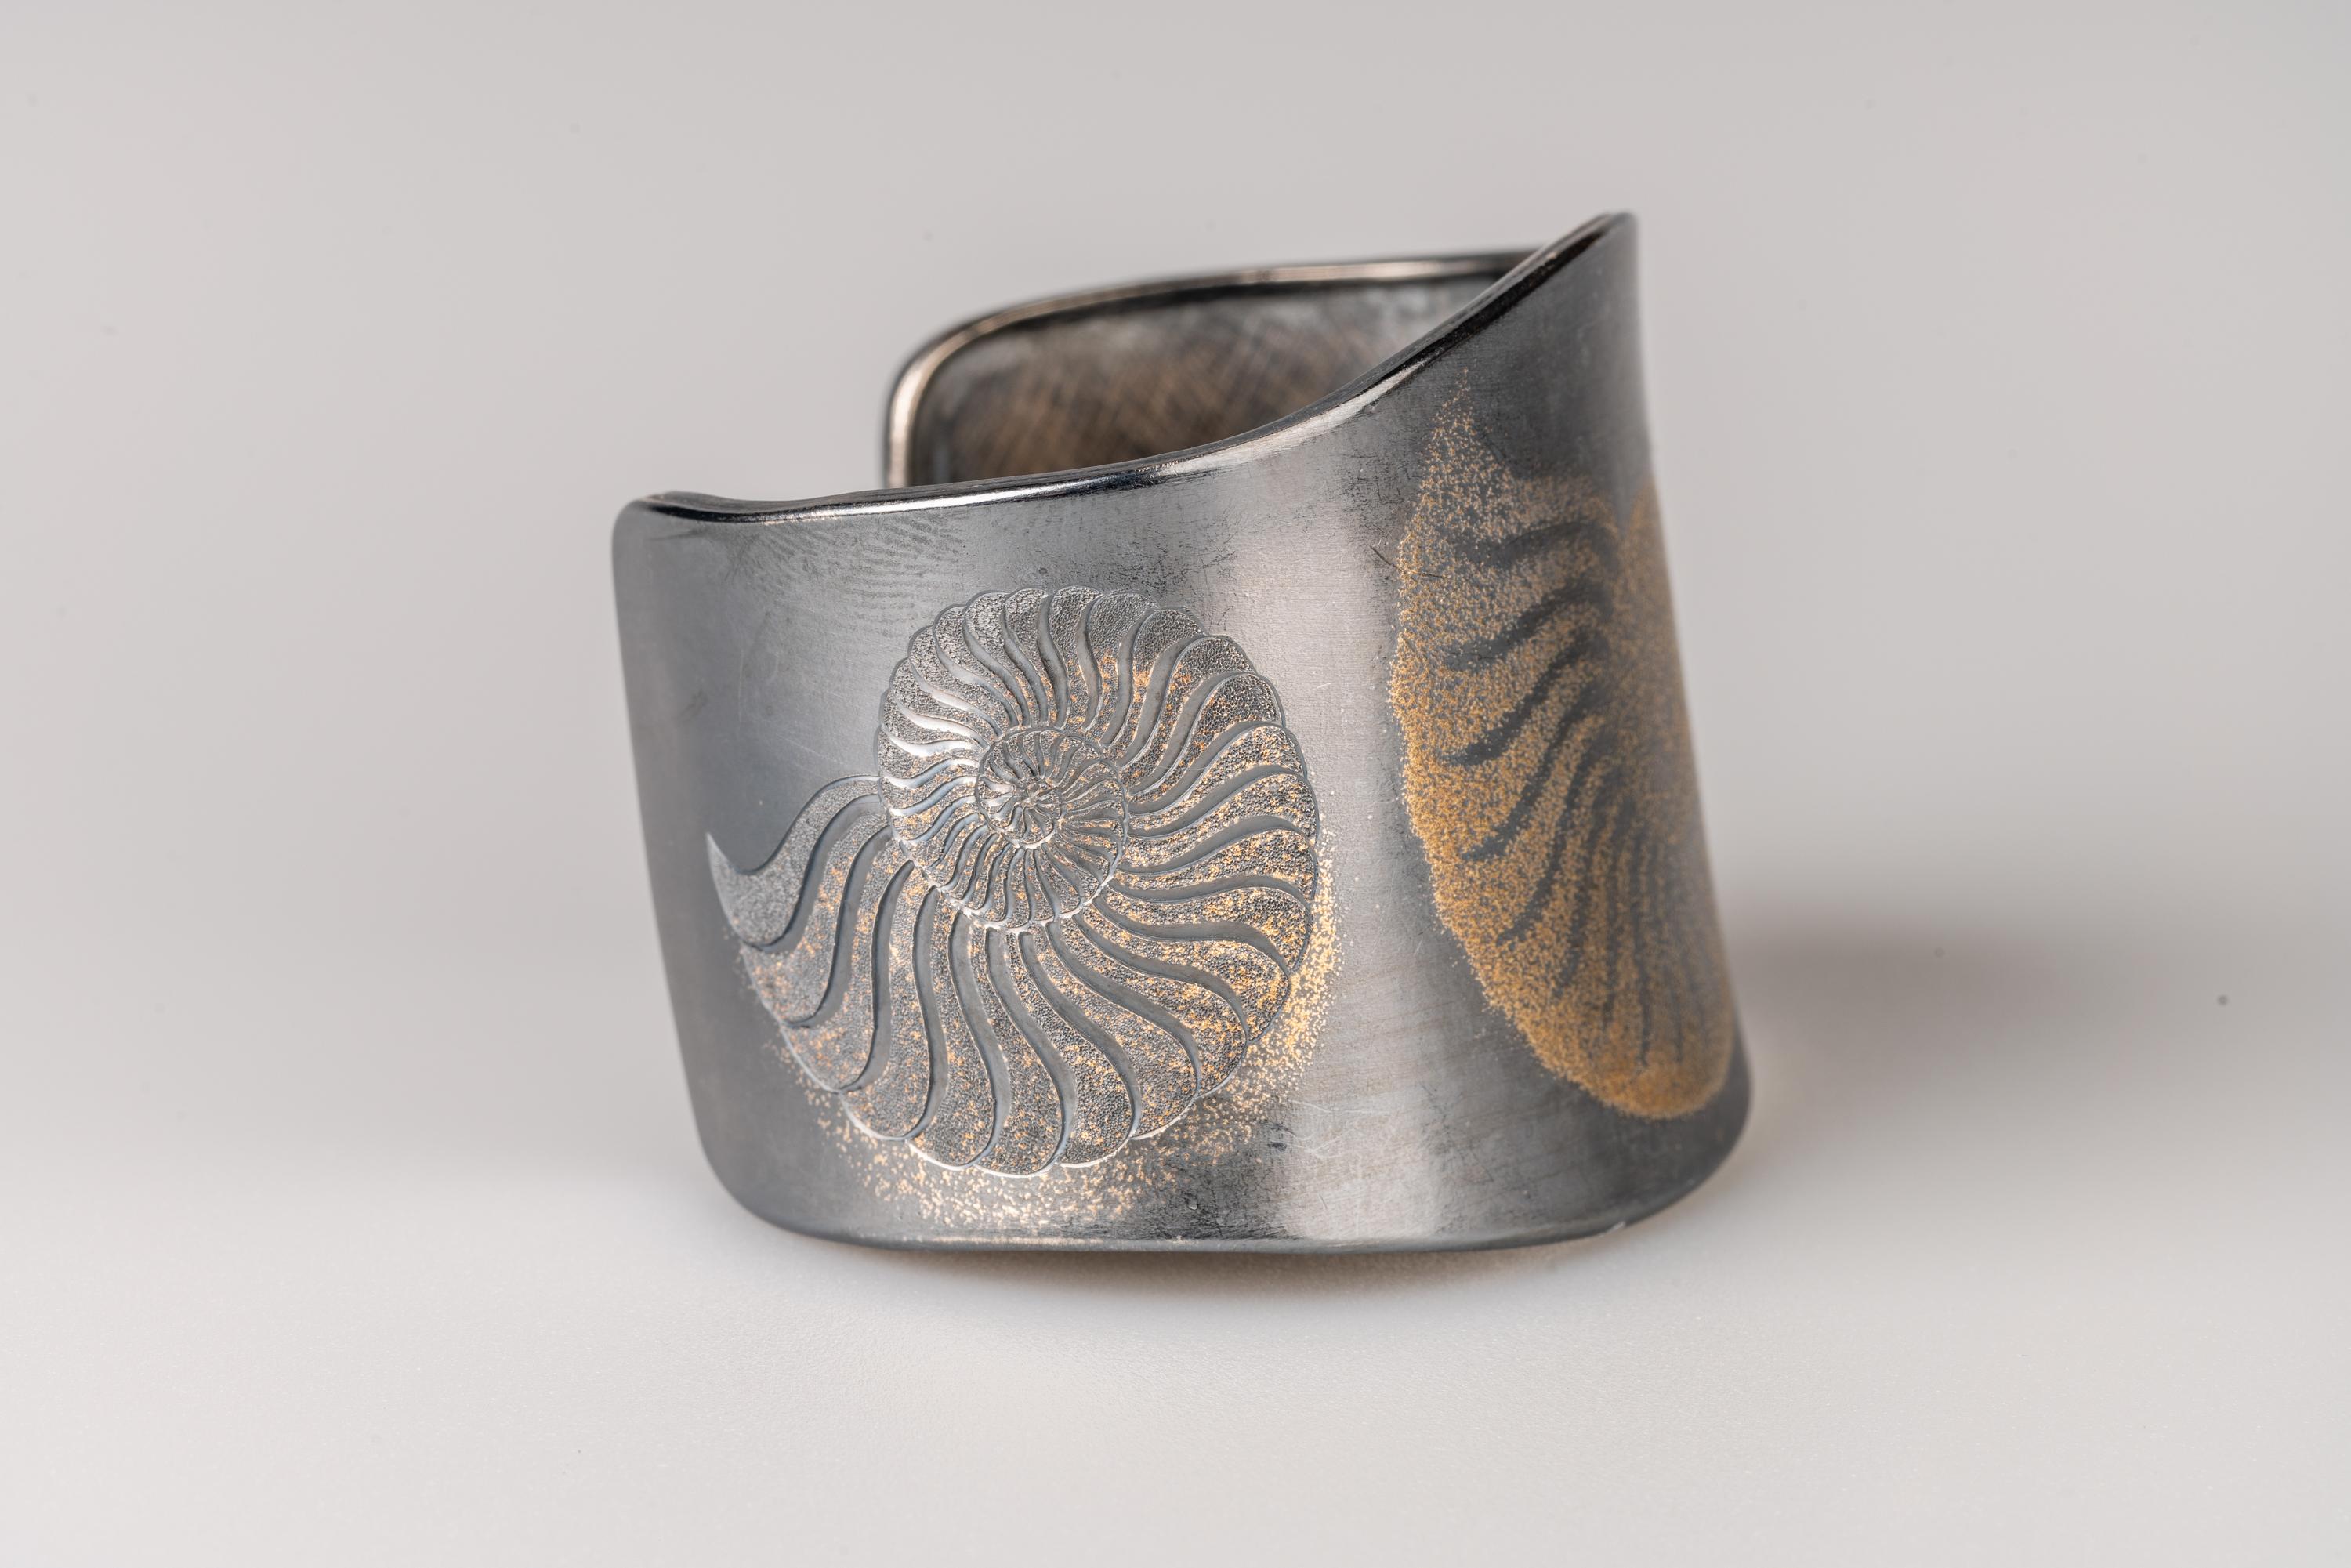 Contemporary Oxidized Sterling Silver and 24 Karat Gold Fairy Dust Ammonite Cuff Bracelet